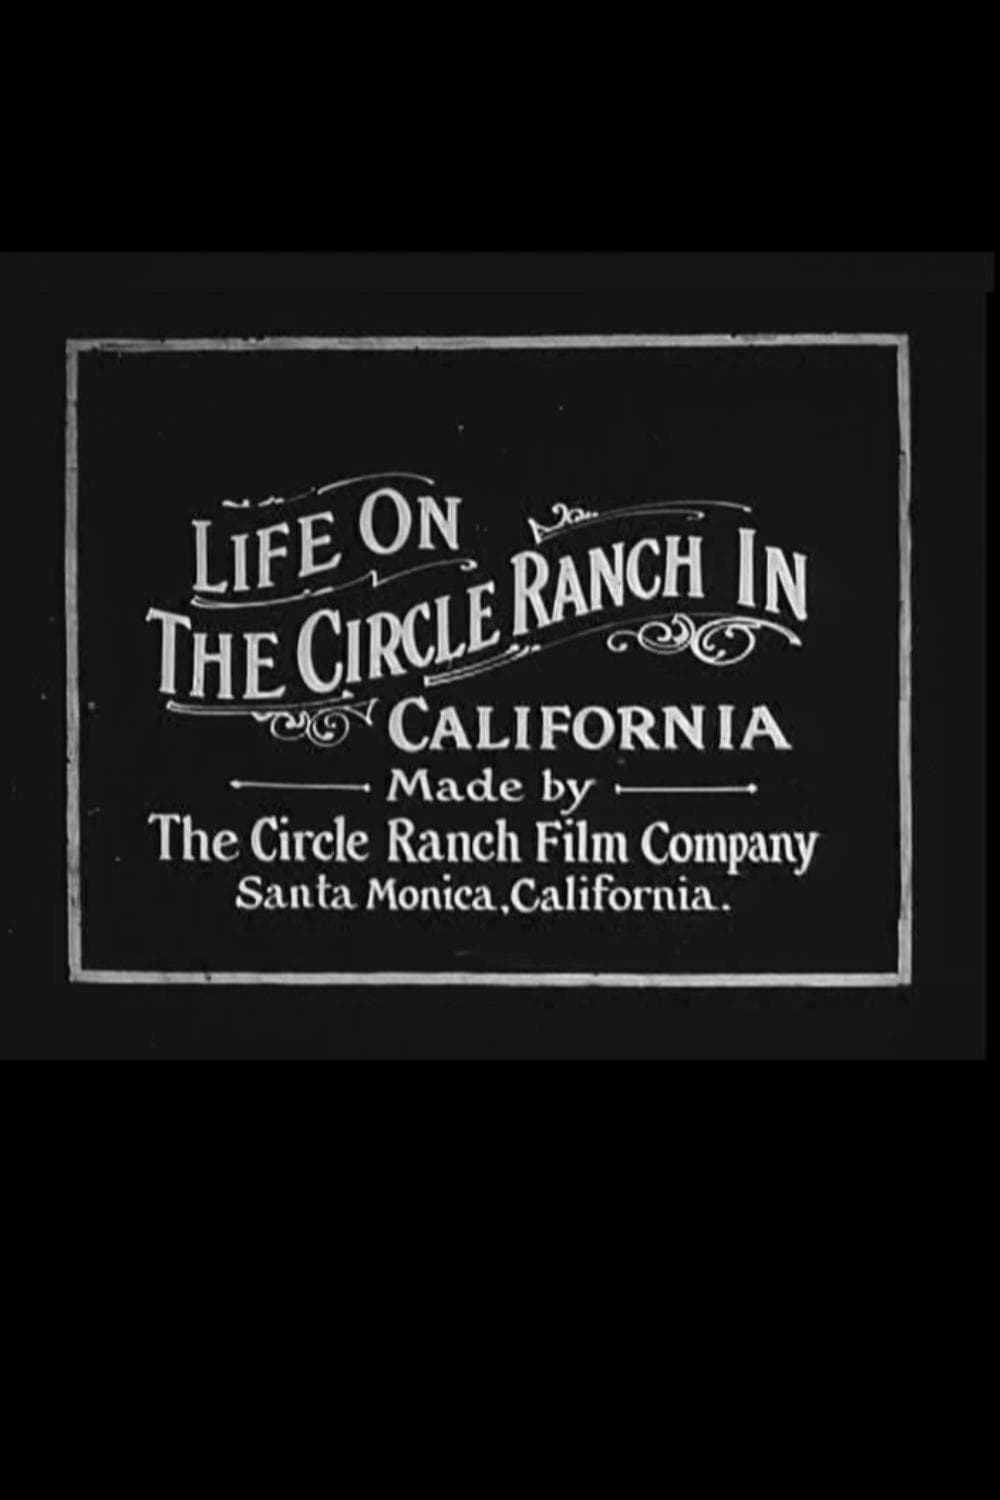 Life on the Circle Ranch in California